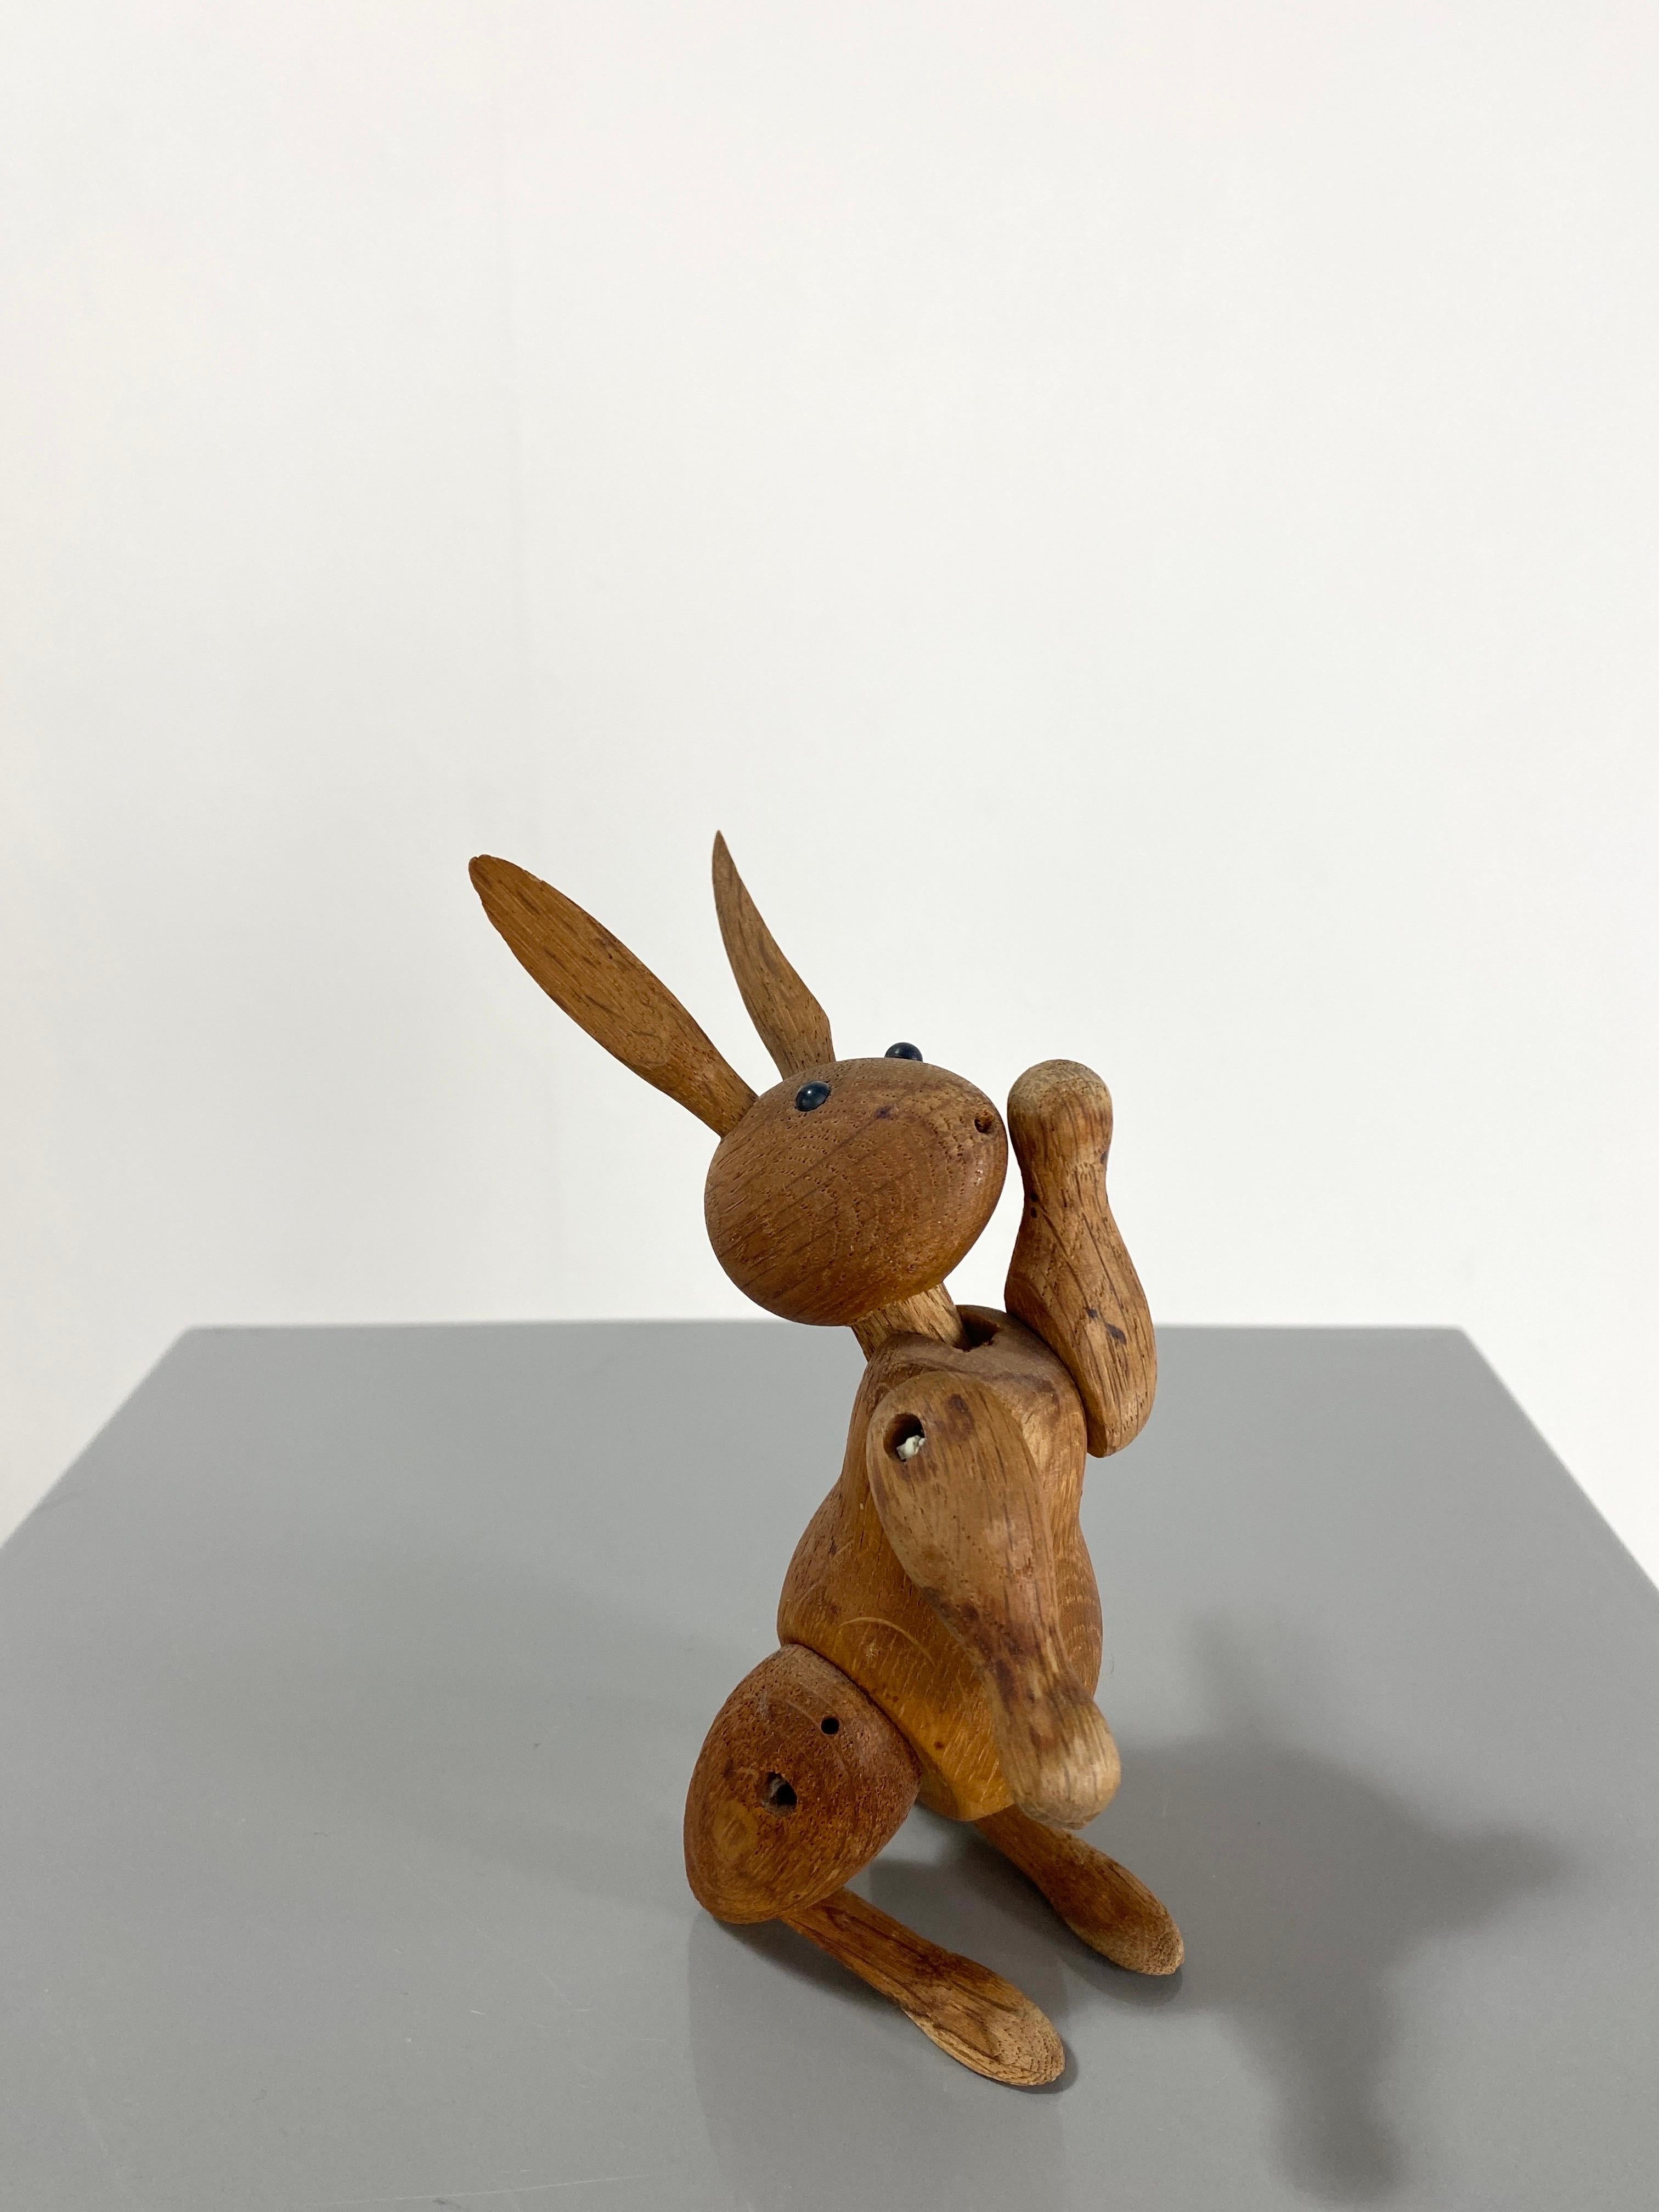 Oak Vintage Rabbit Figurine by Kay Bojesen, It Was Designed in 1957, This is an Exam